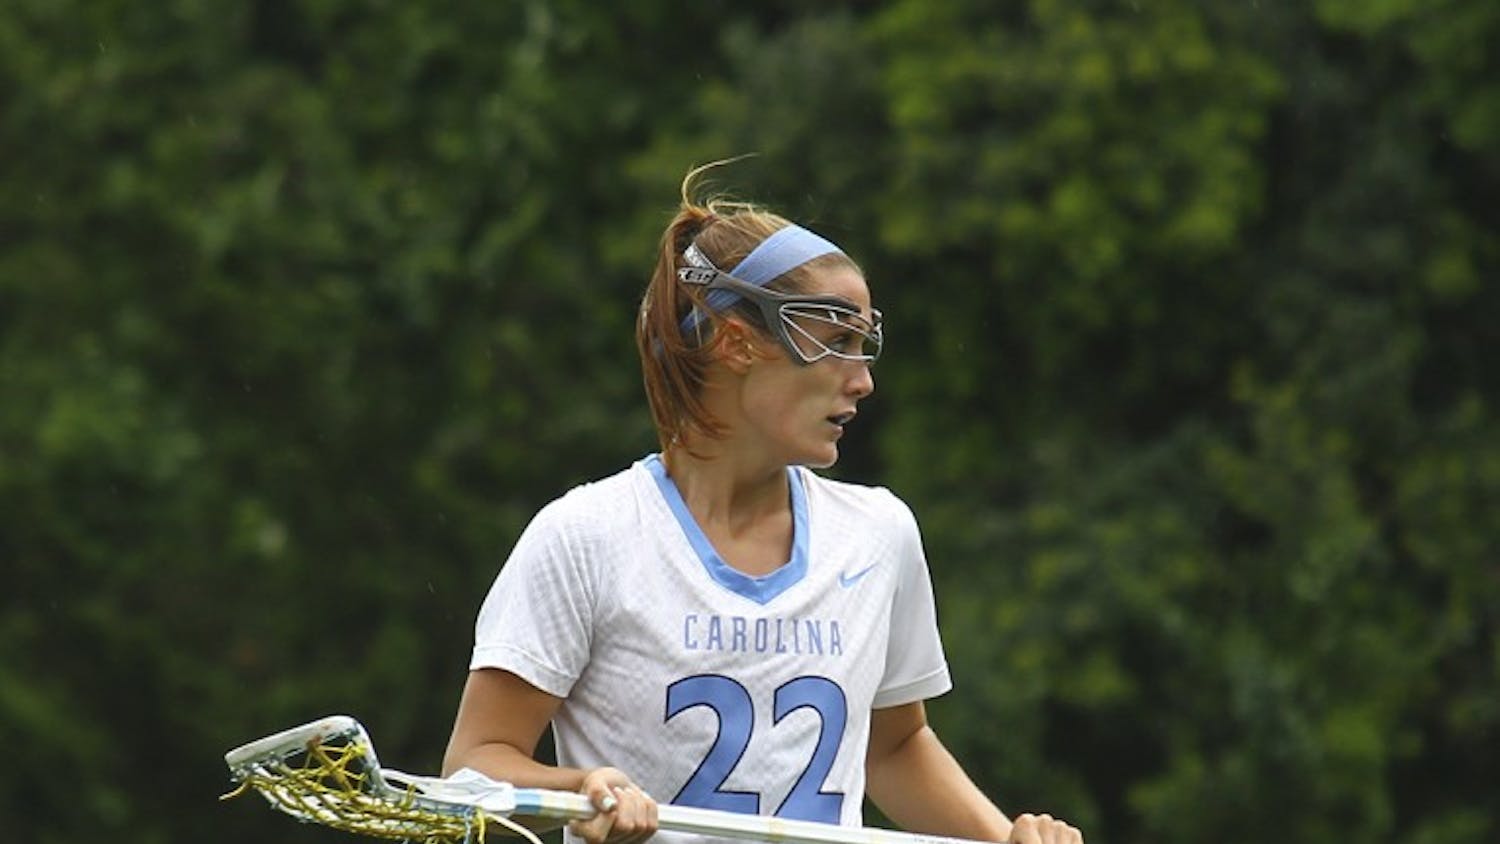 Maggie Bill faces off against the University of Florida during the NCAA Women's Lacrosse Tournament Sunday.